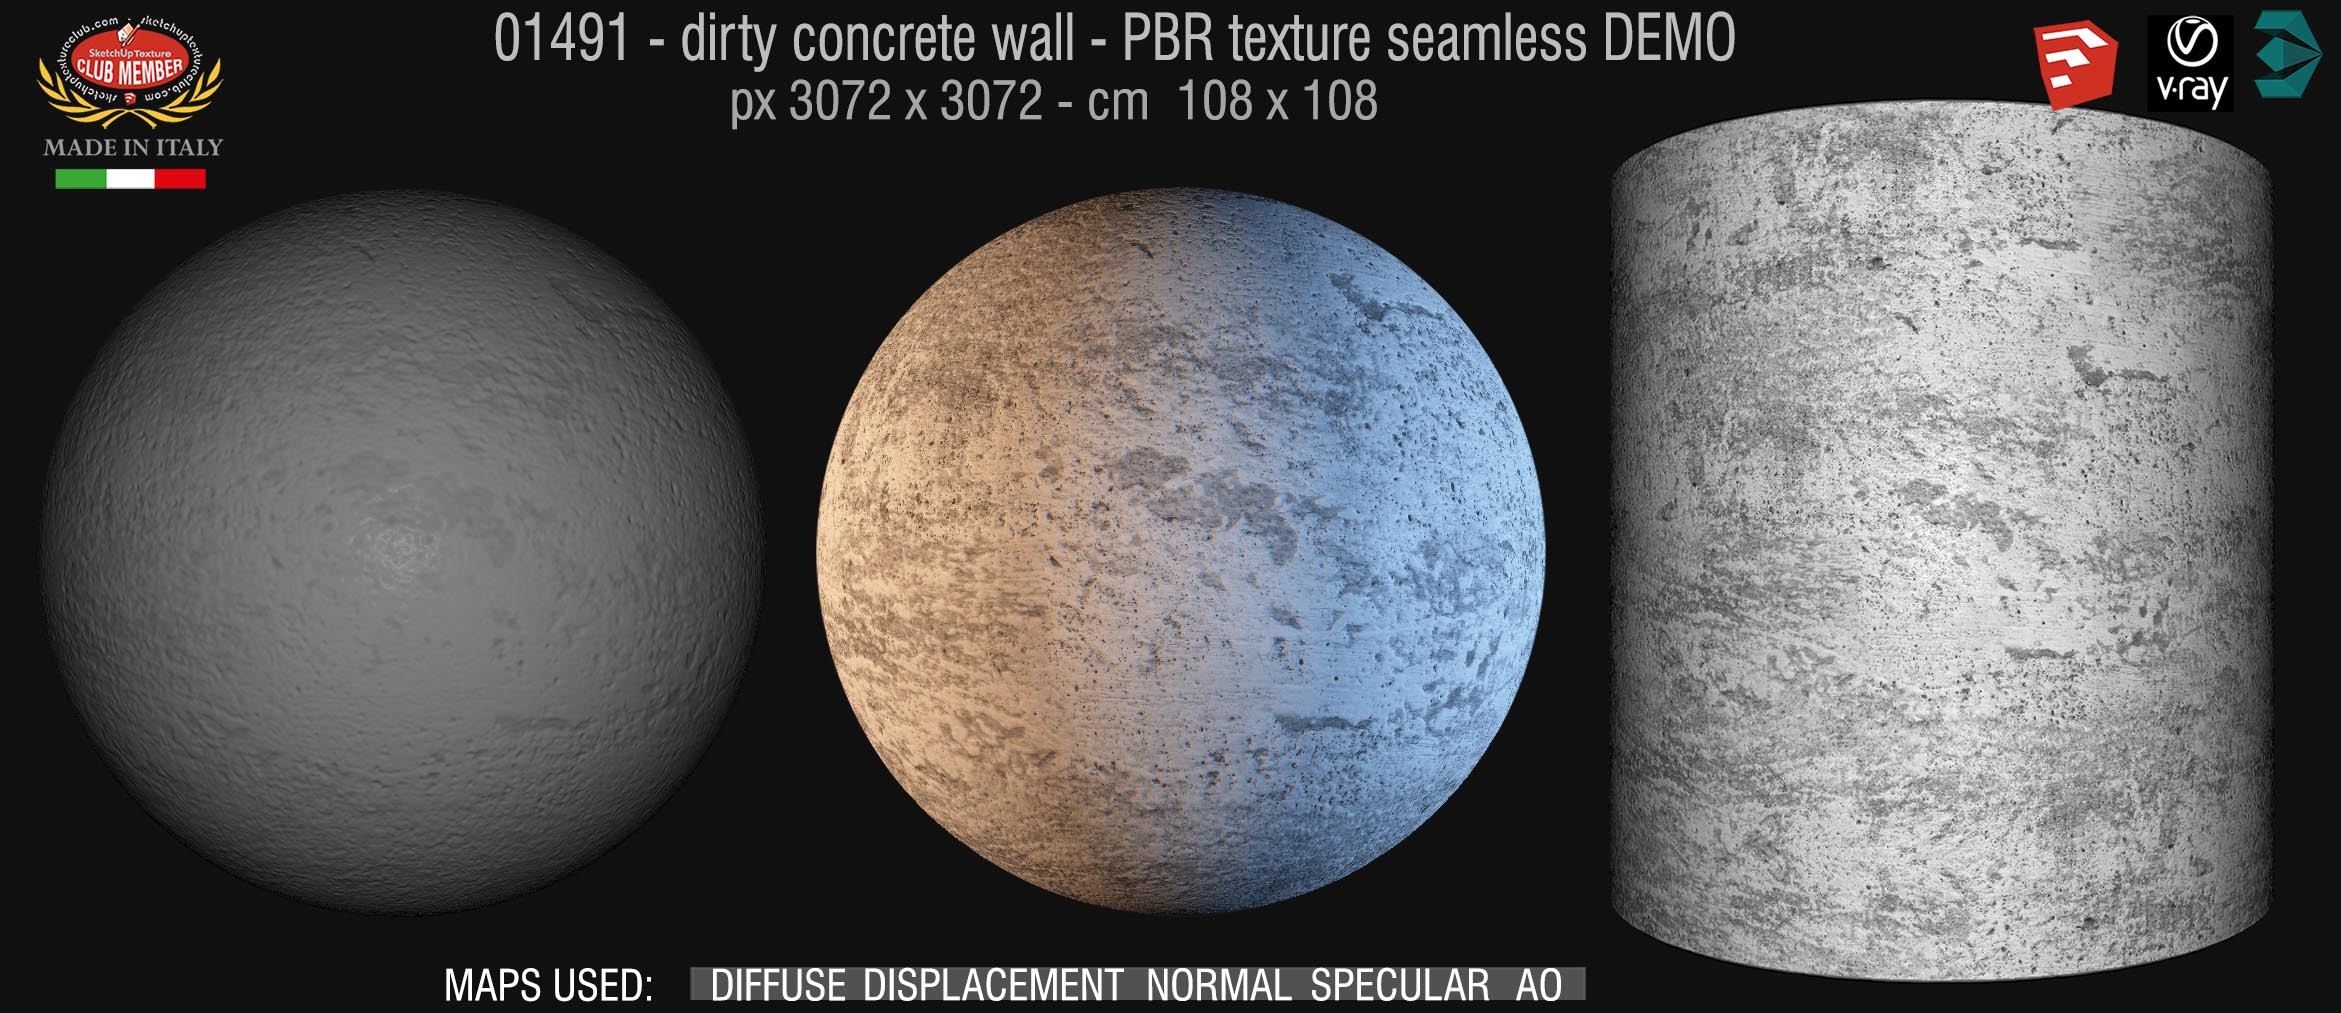 01491 Concrete bare dirty wall PBR texture seamless DEMO